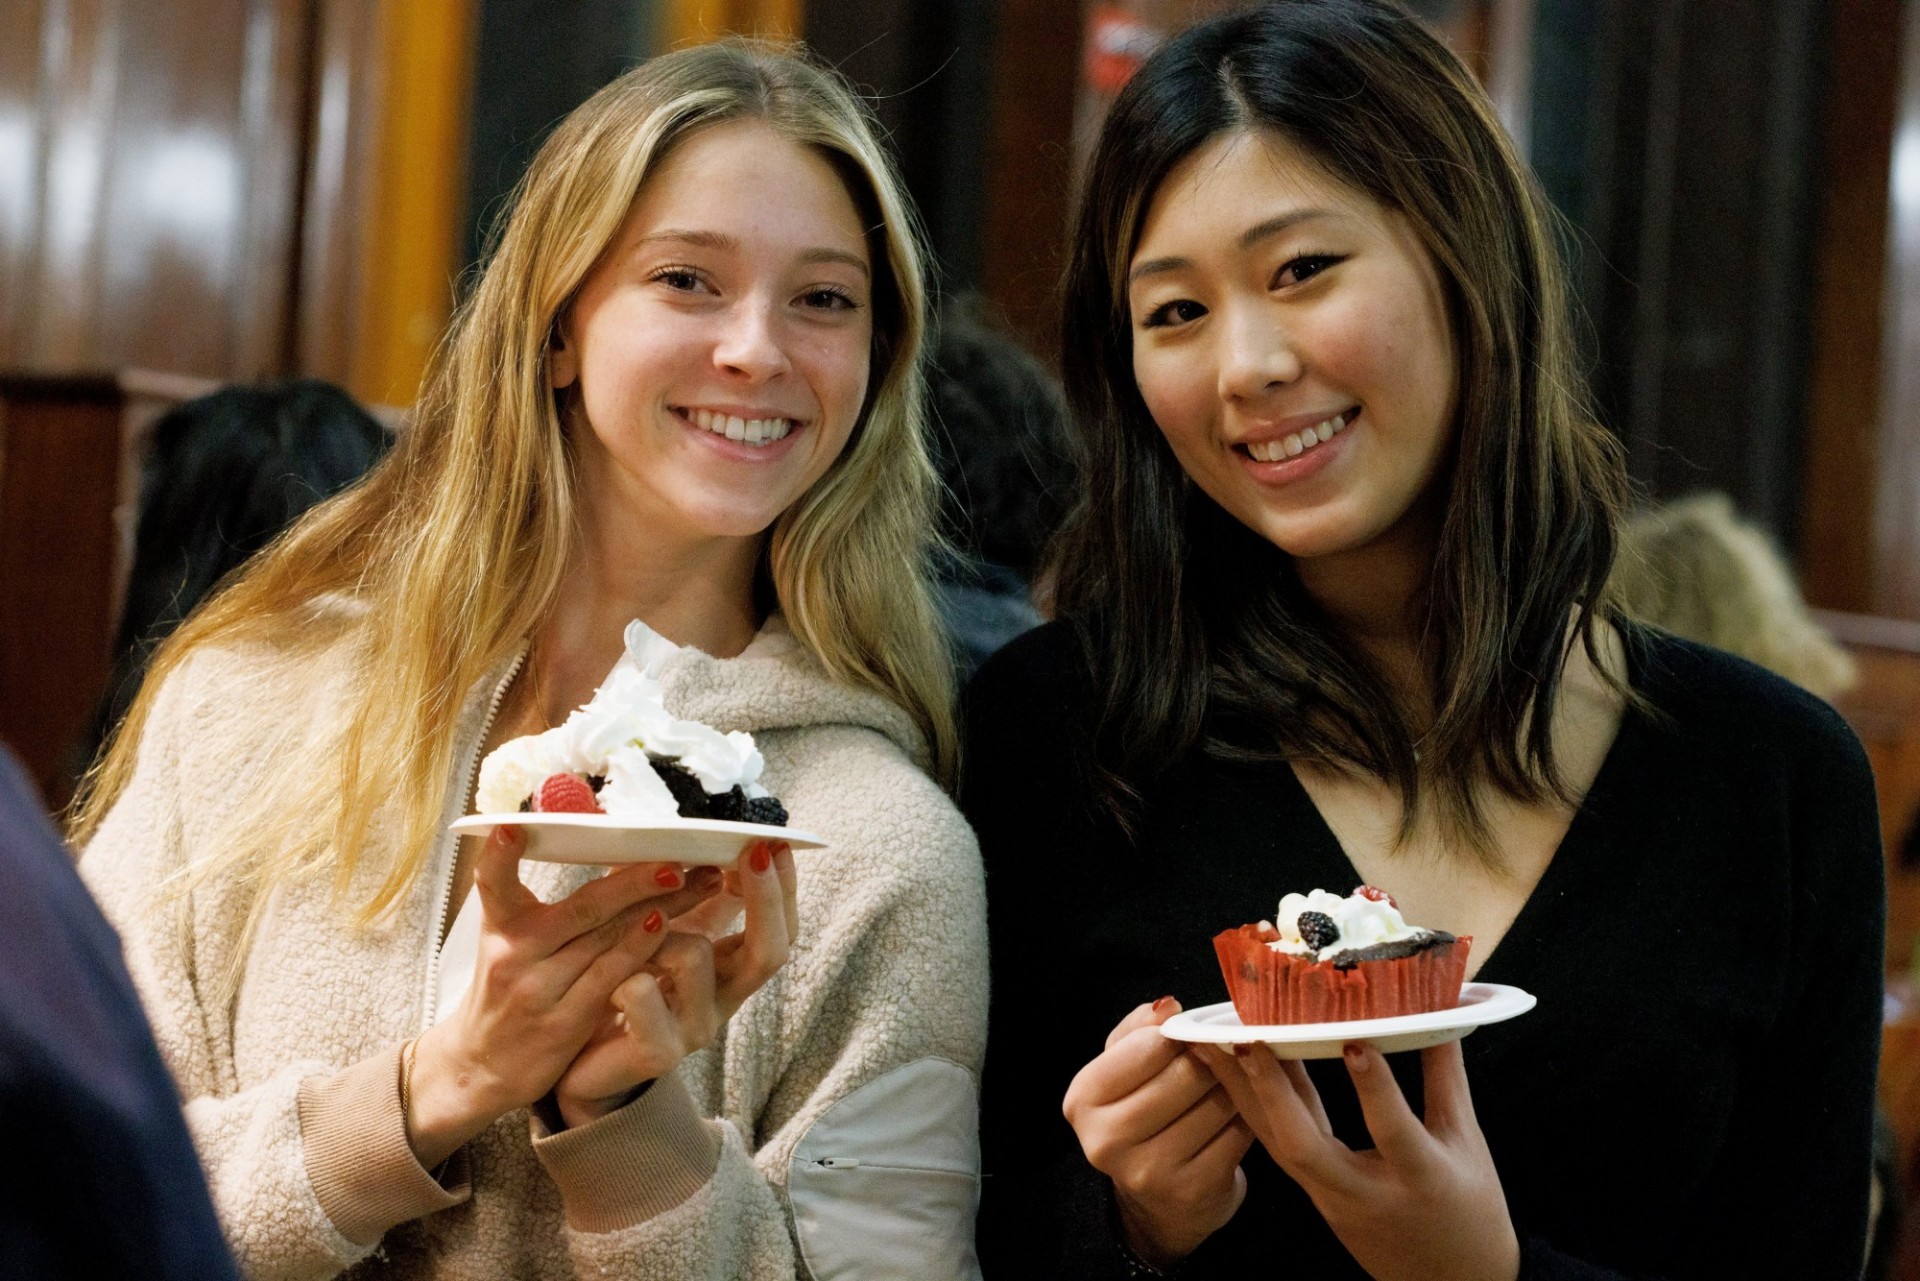 Two students hold up desserts in John Jay Dining Hall.